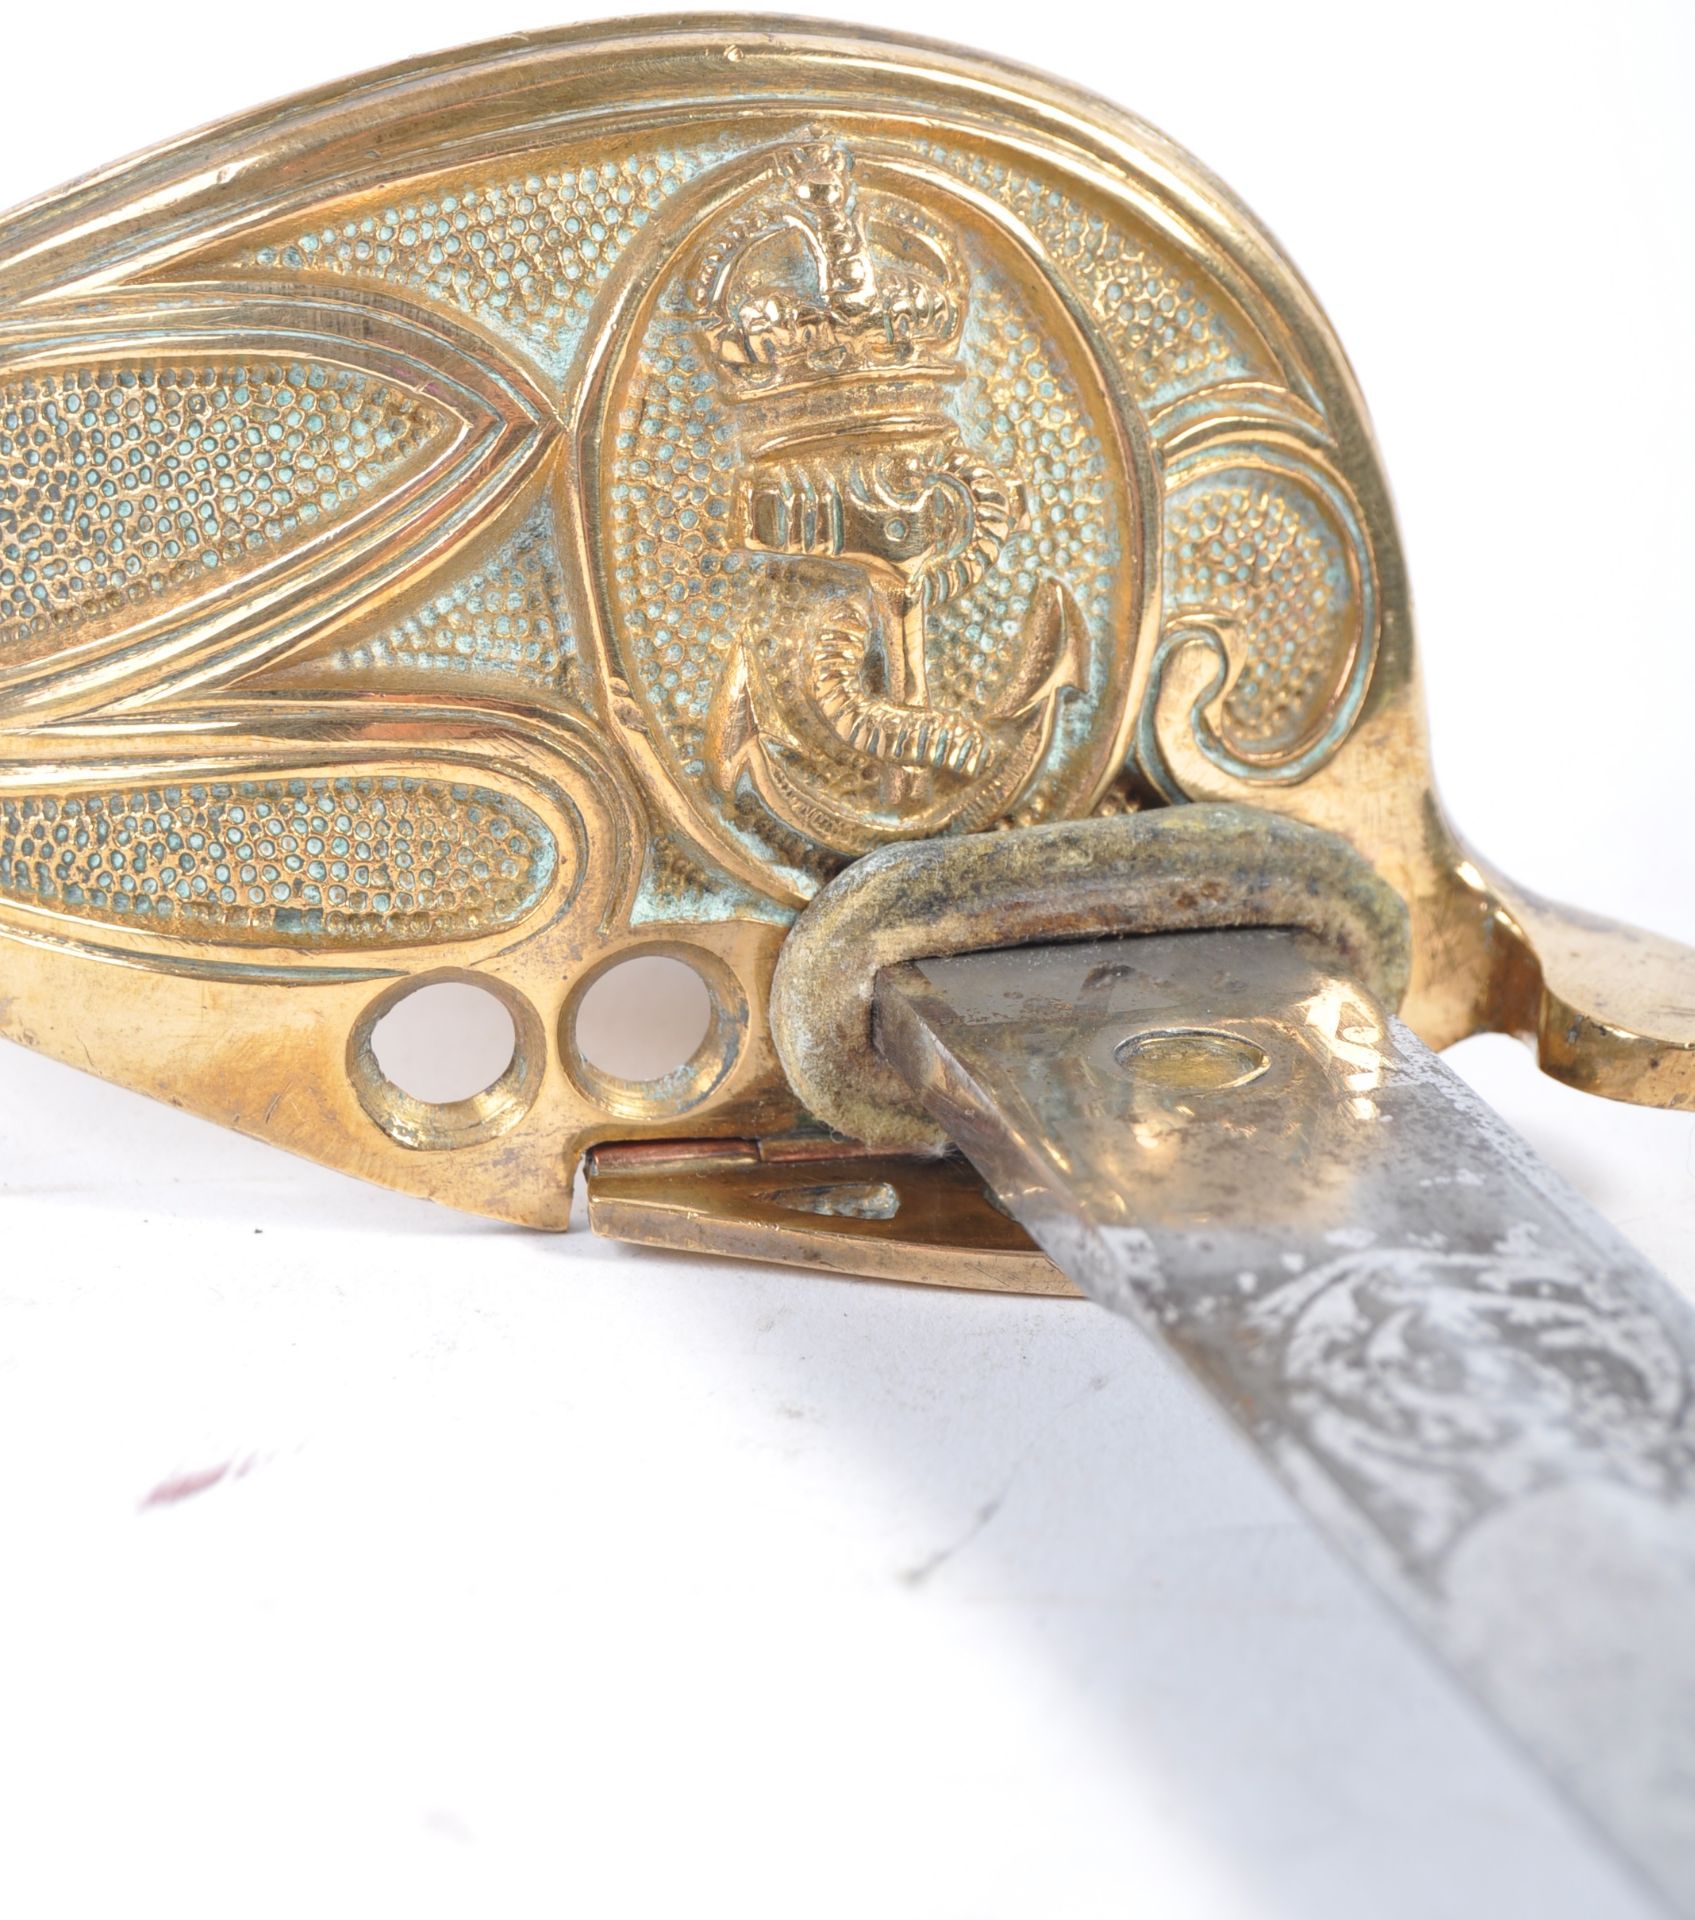 19TH CENTURY VICTORIAN NAVAL OFFICERS DRESS SWORD - Image 6 of 6